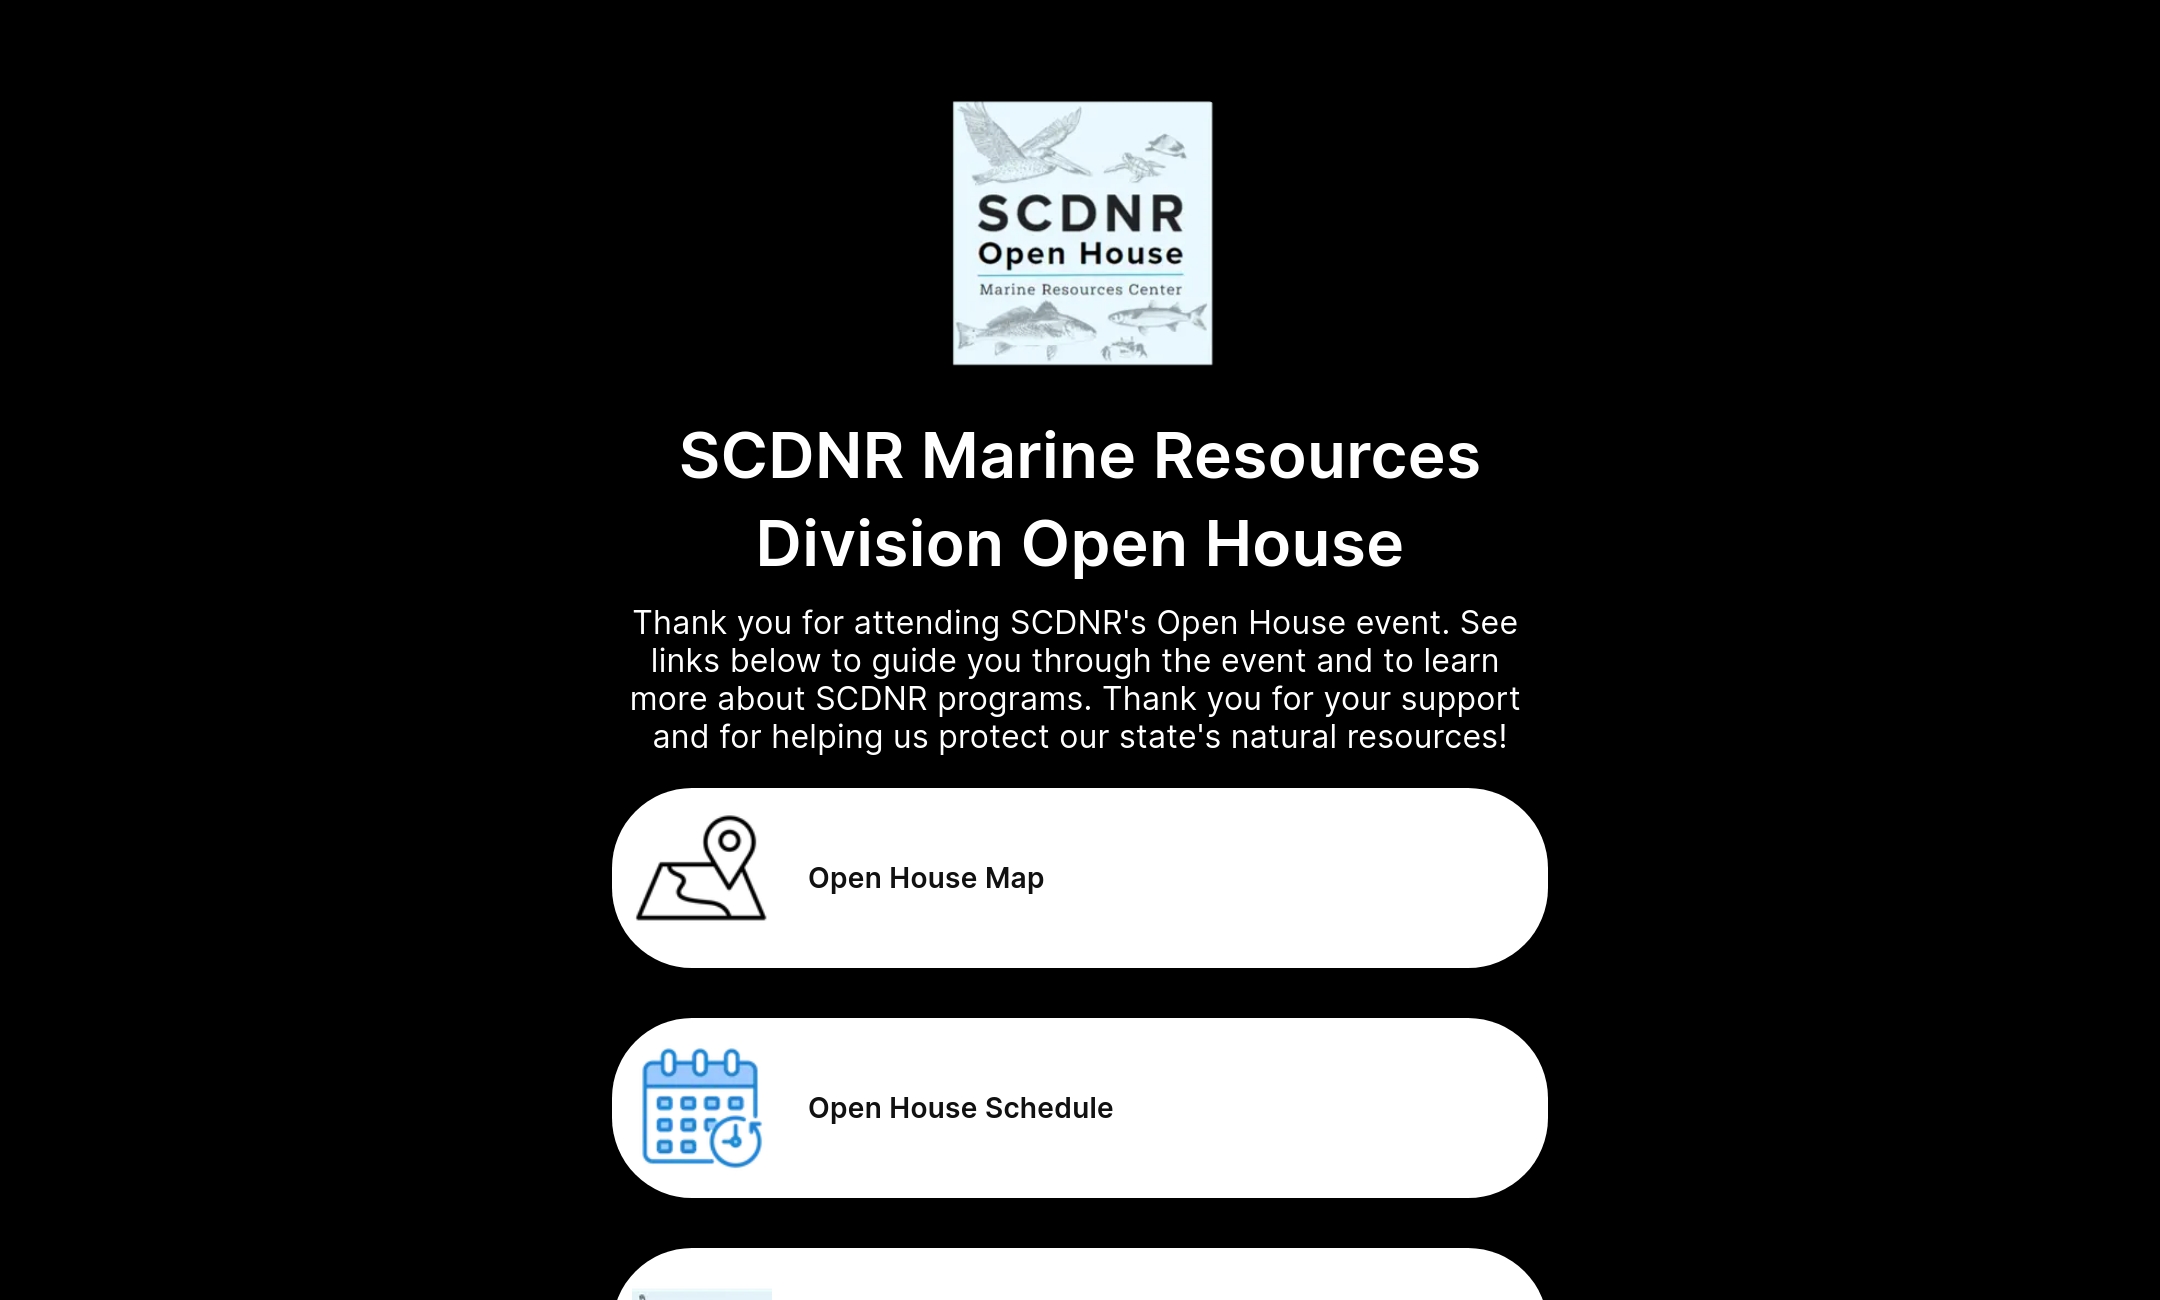 SCDNR Marine Resources Division Open House's Flowpage